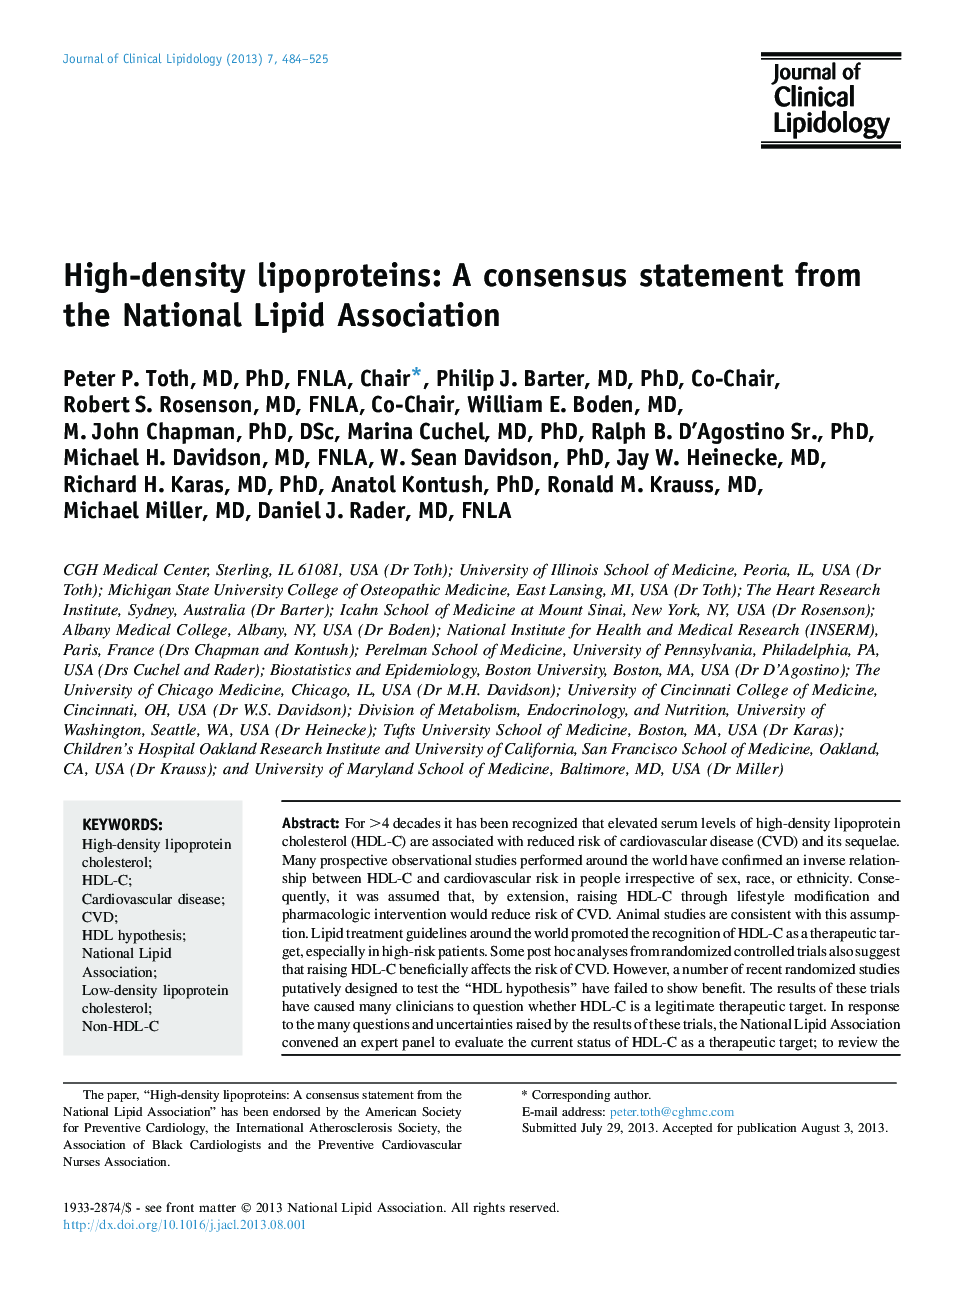 High-density lipoproteins: A consensus statement from the National Lipid Association